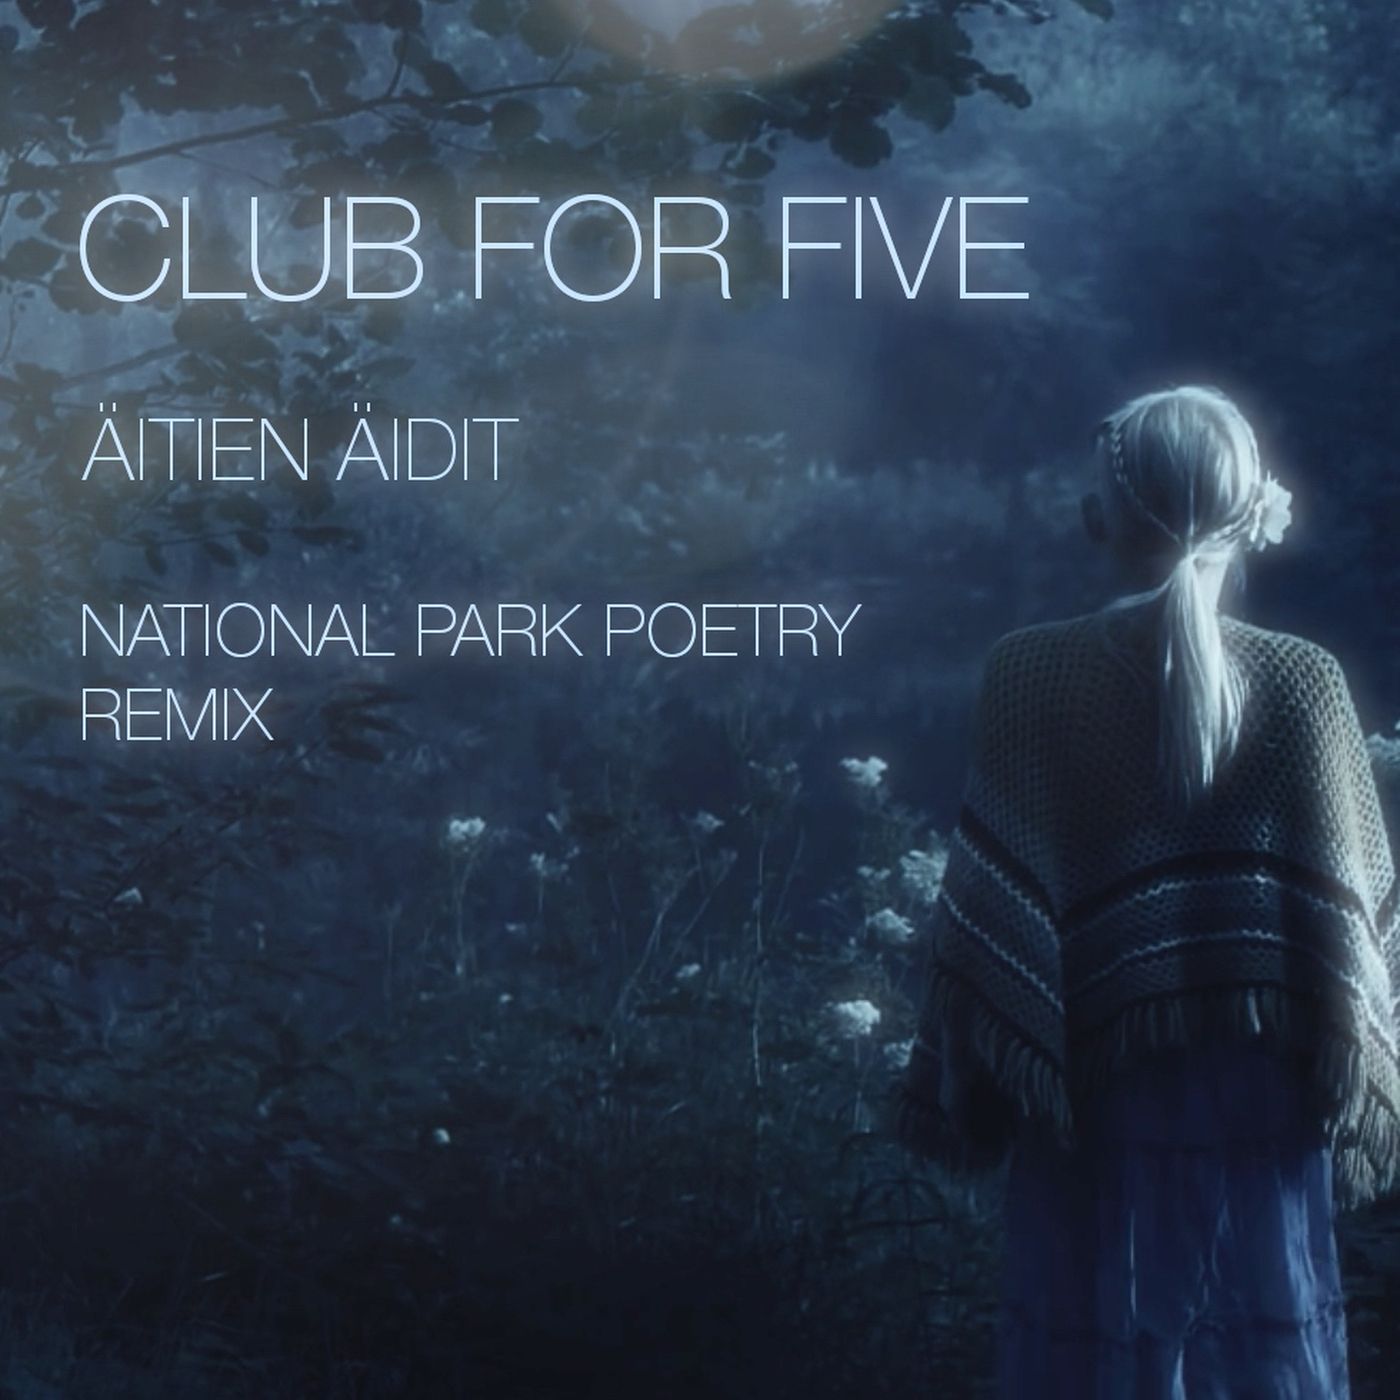 itien idit National Park Poetry Remix